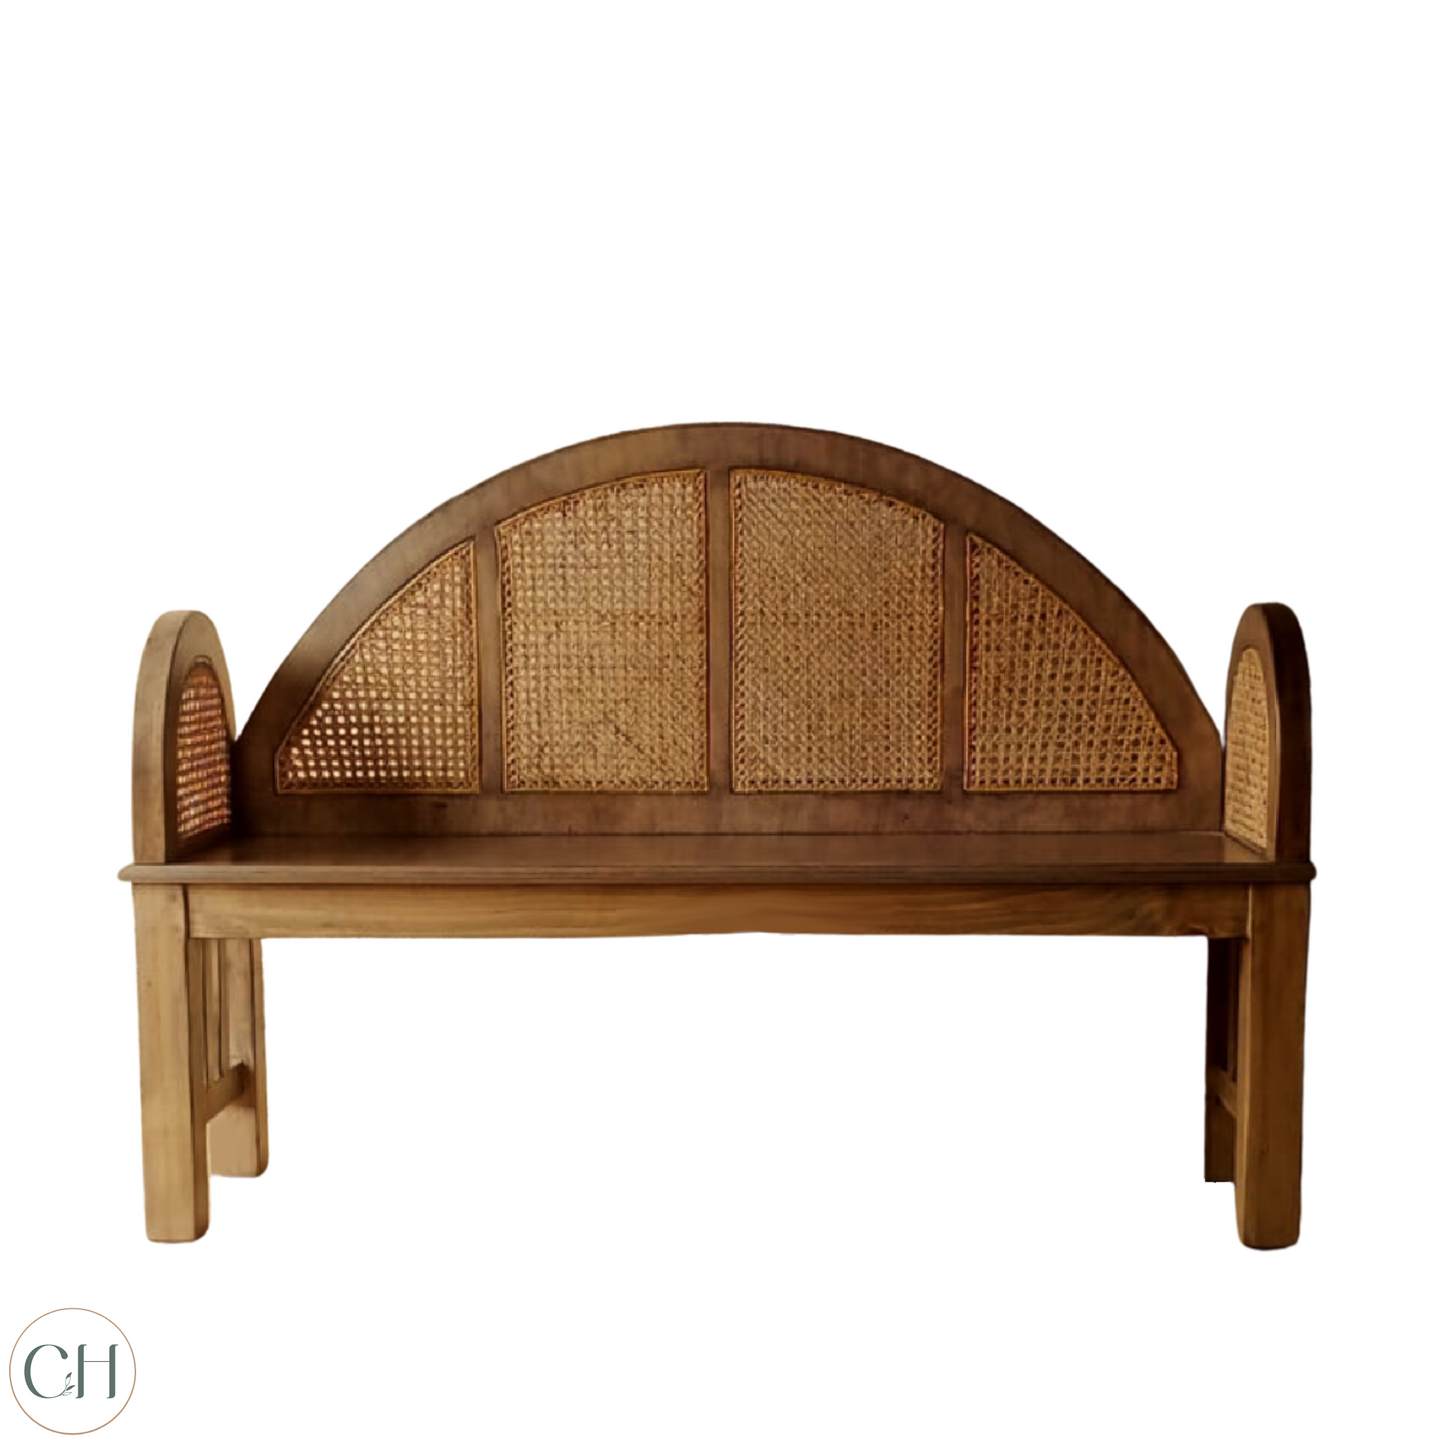 CustHum Elenore - solid wood entryway bench with woven rattan on back and arms (front view against white background)